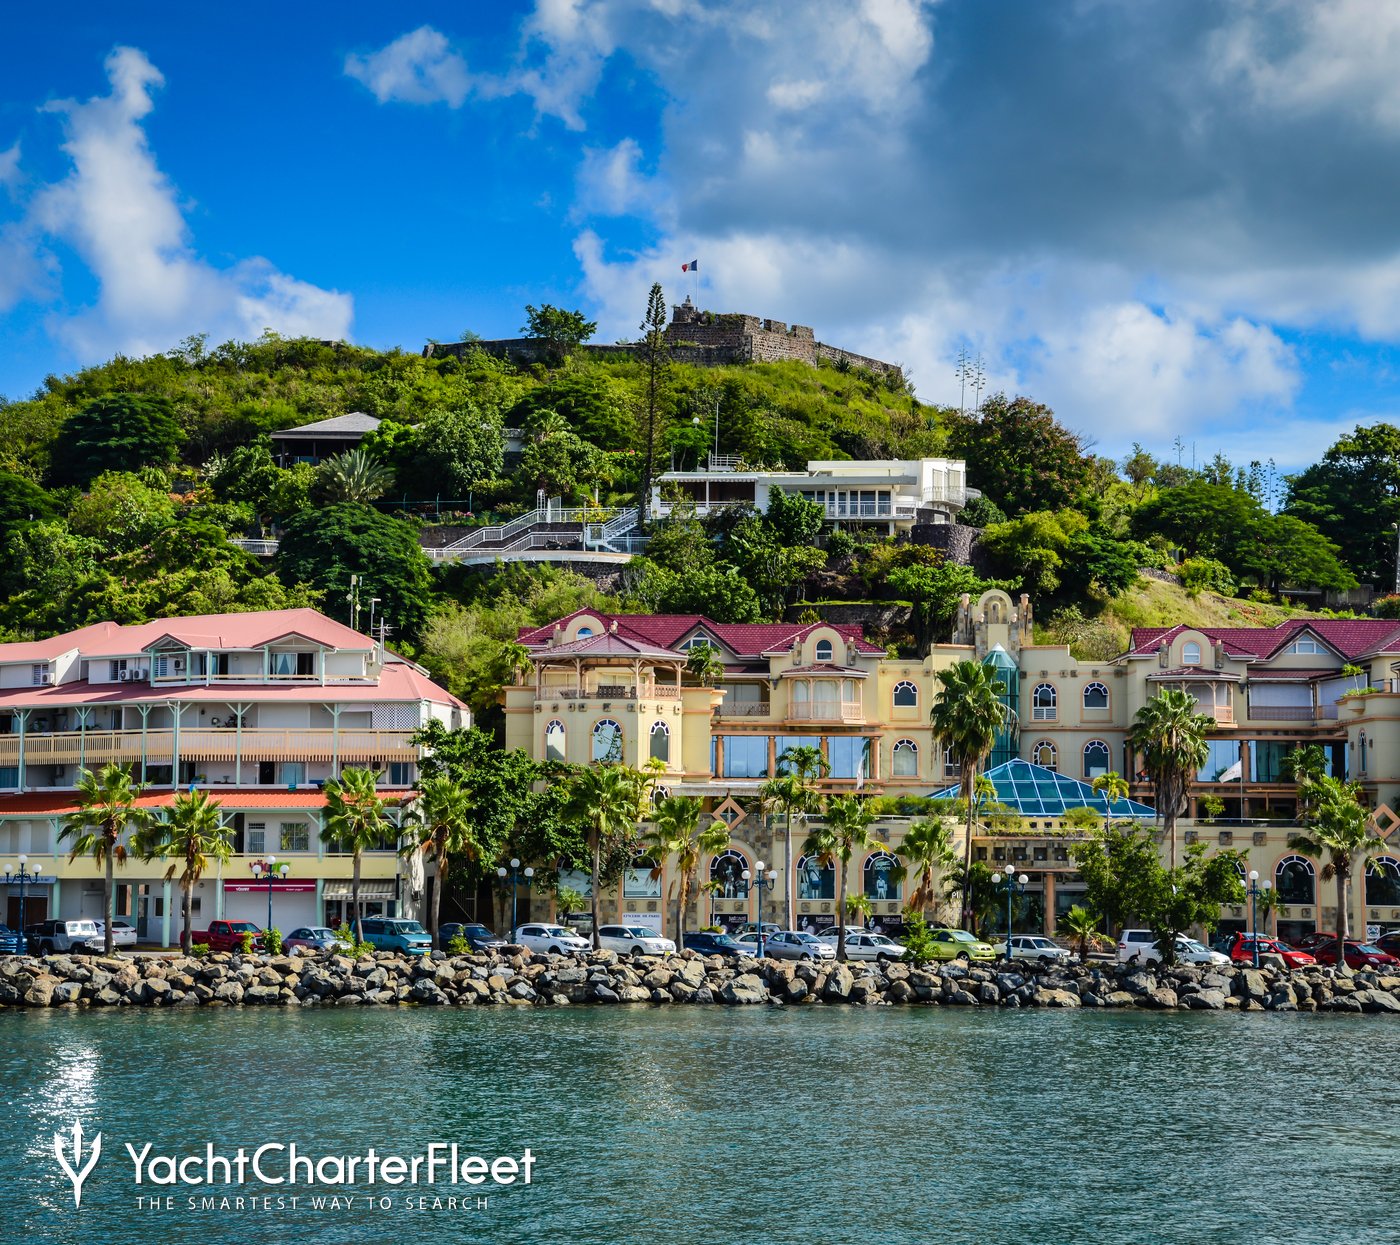 The Ultime 6 Spots not to be missed when Sailing in St Barts - YBH